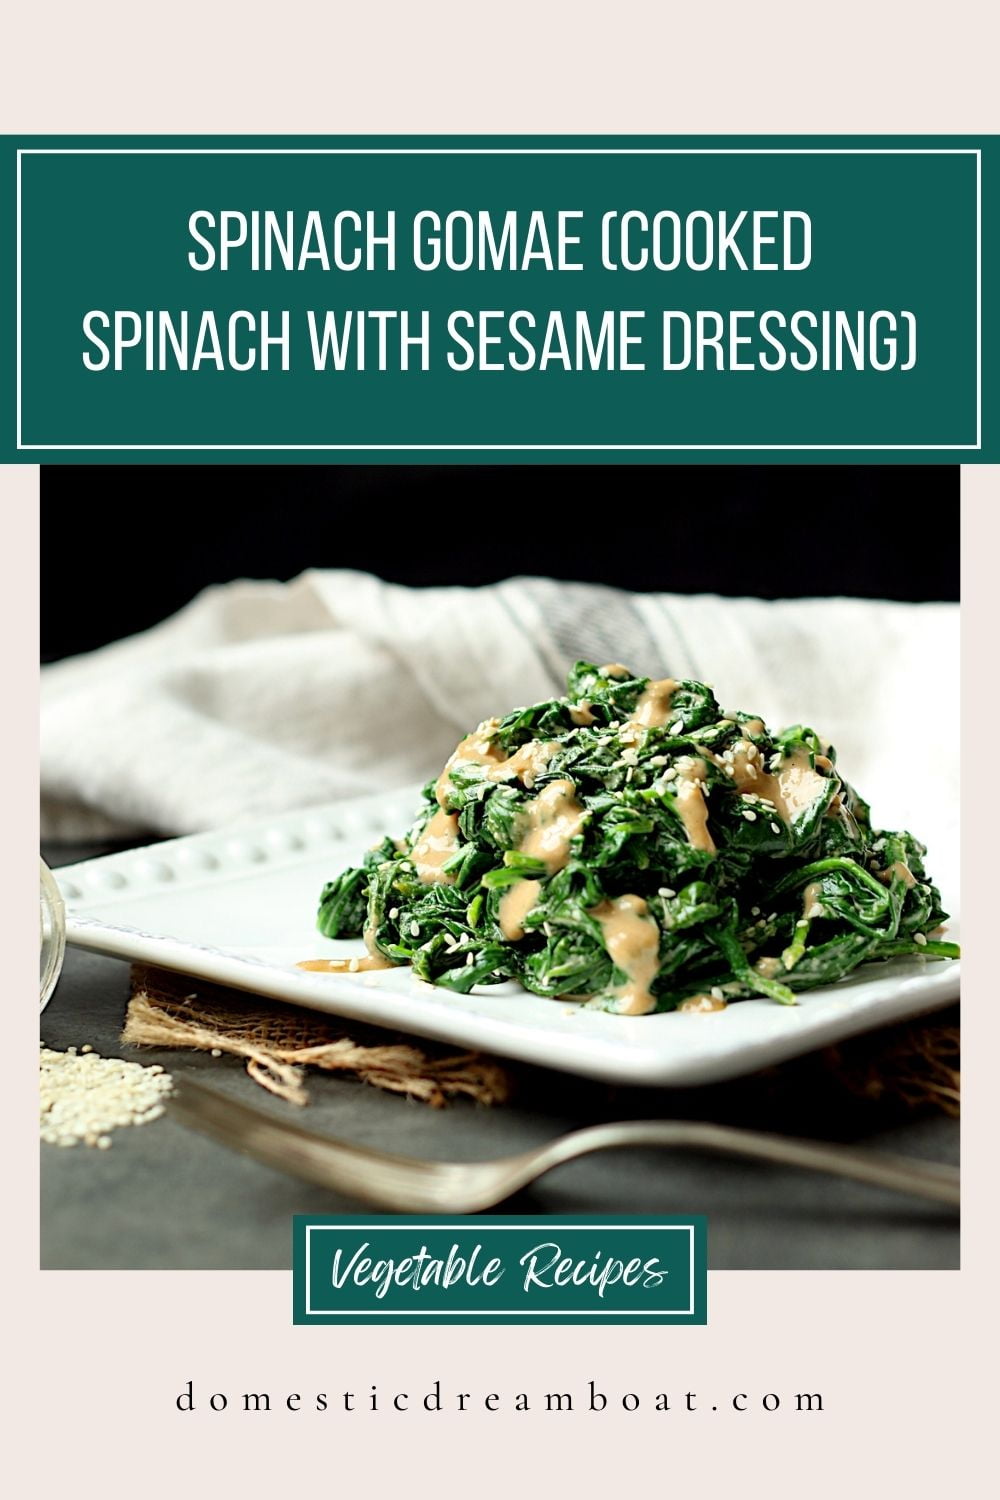 Spinach Gomae Cooked Spinach with Sesame Dressing 1